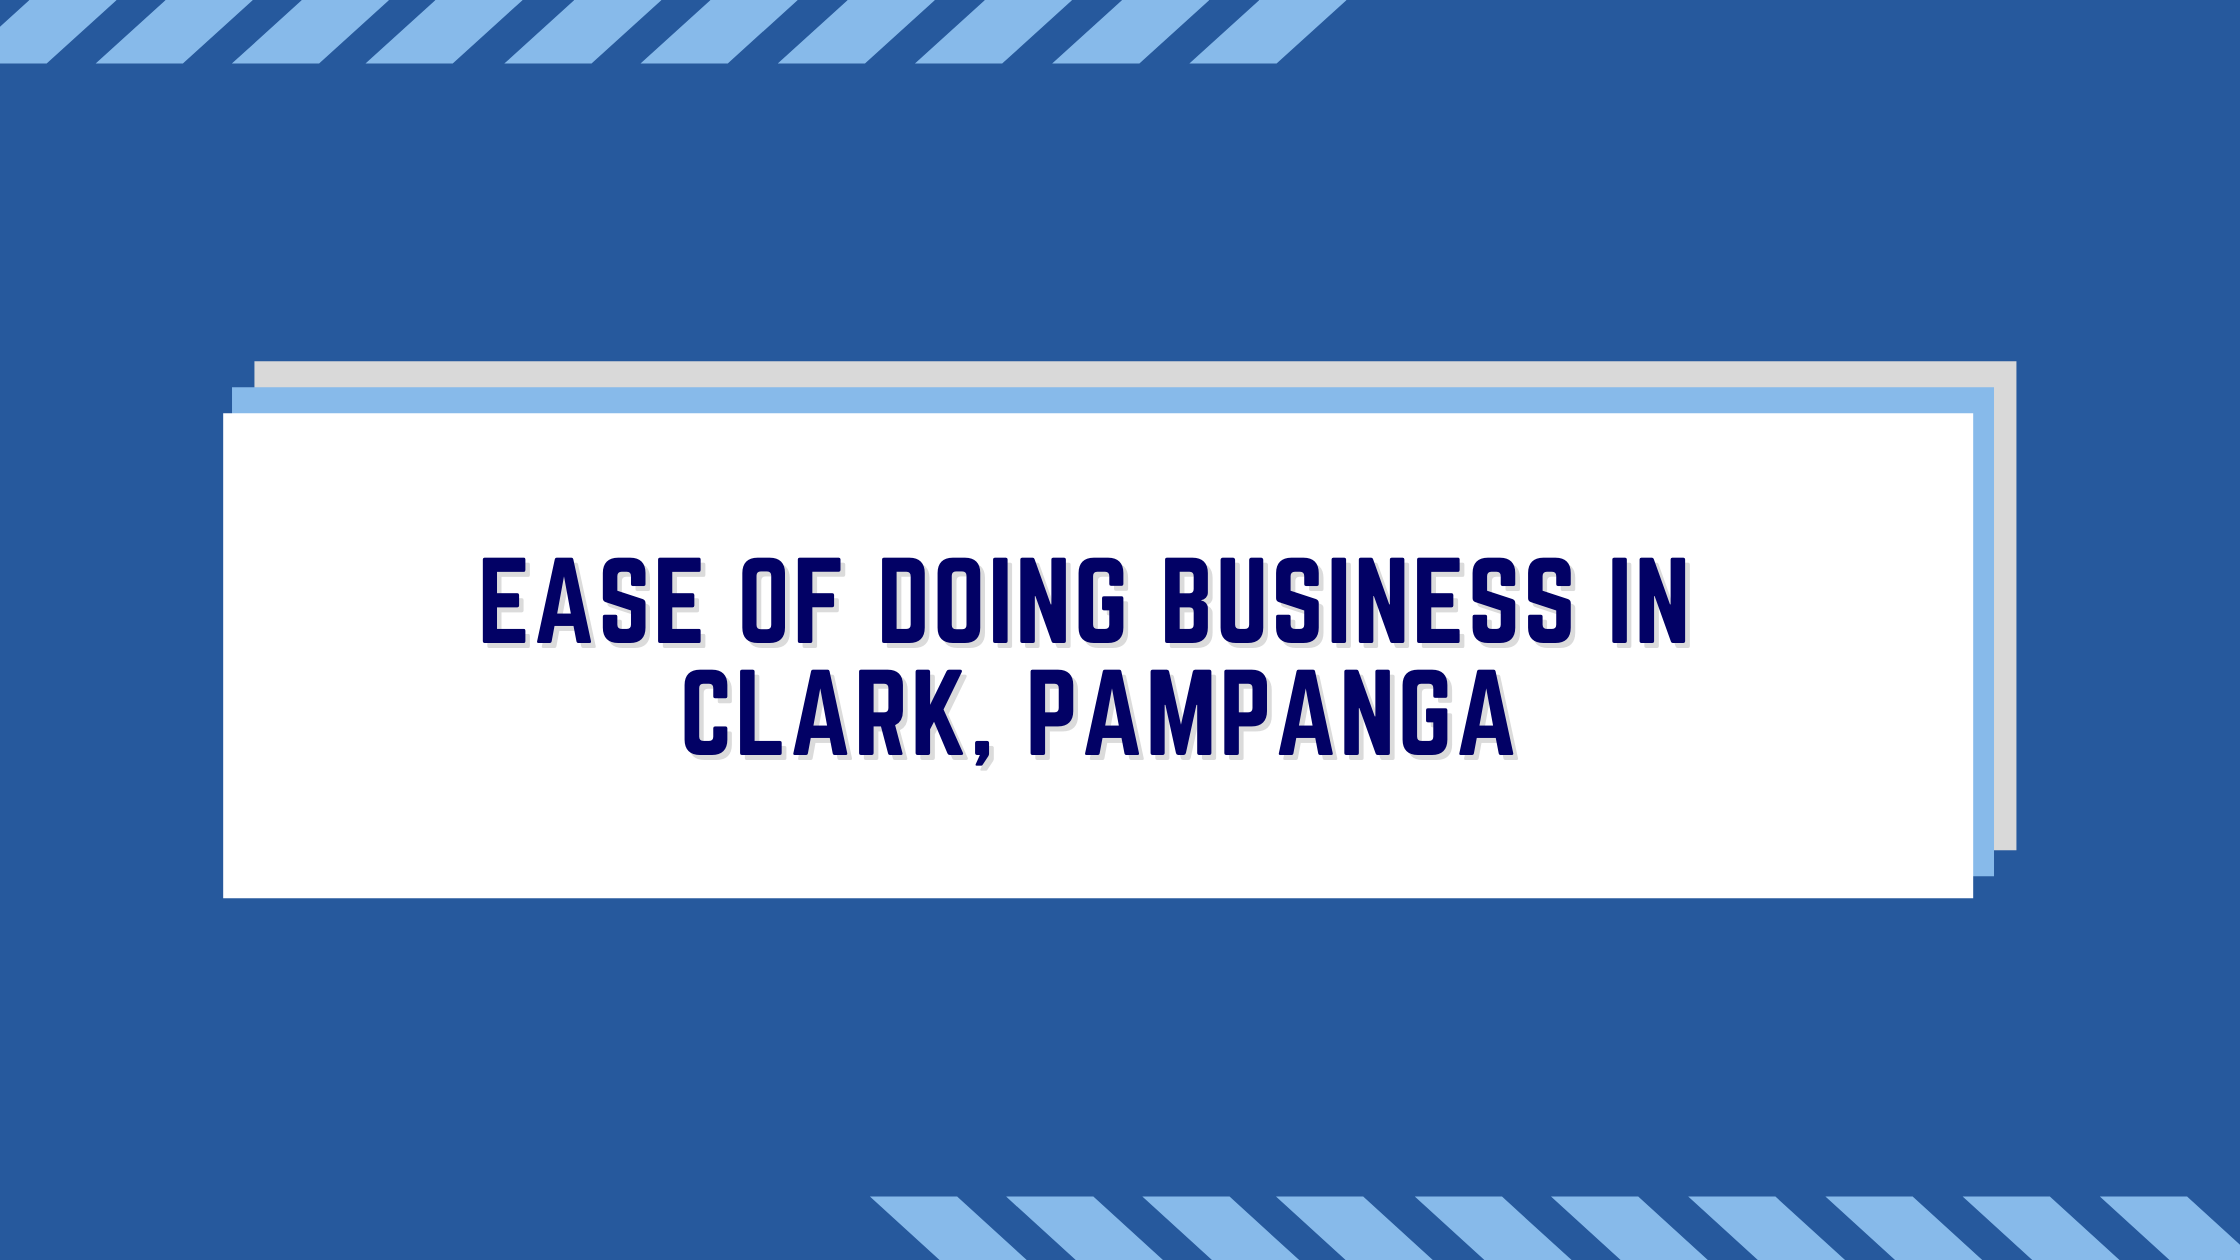 Ease of doing business in Clark